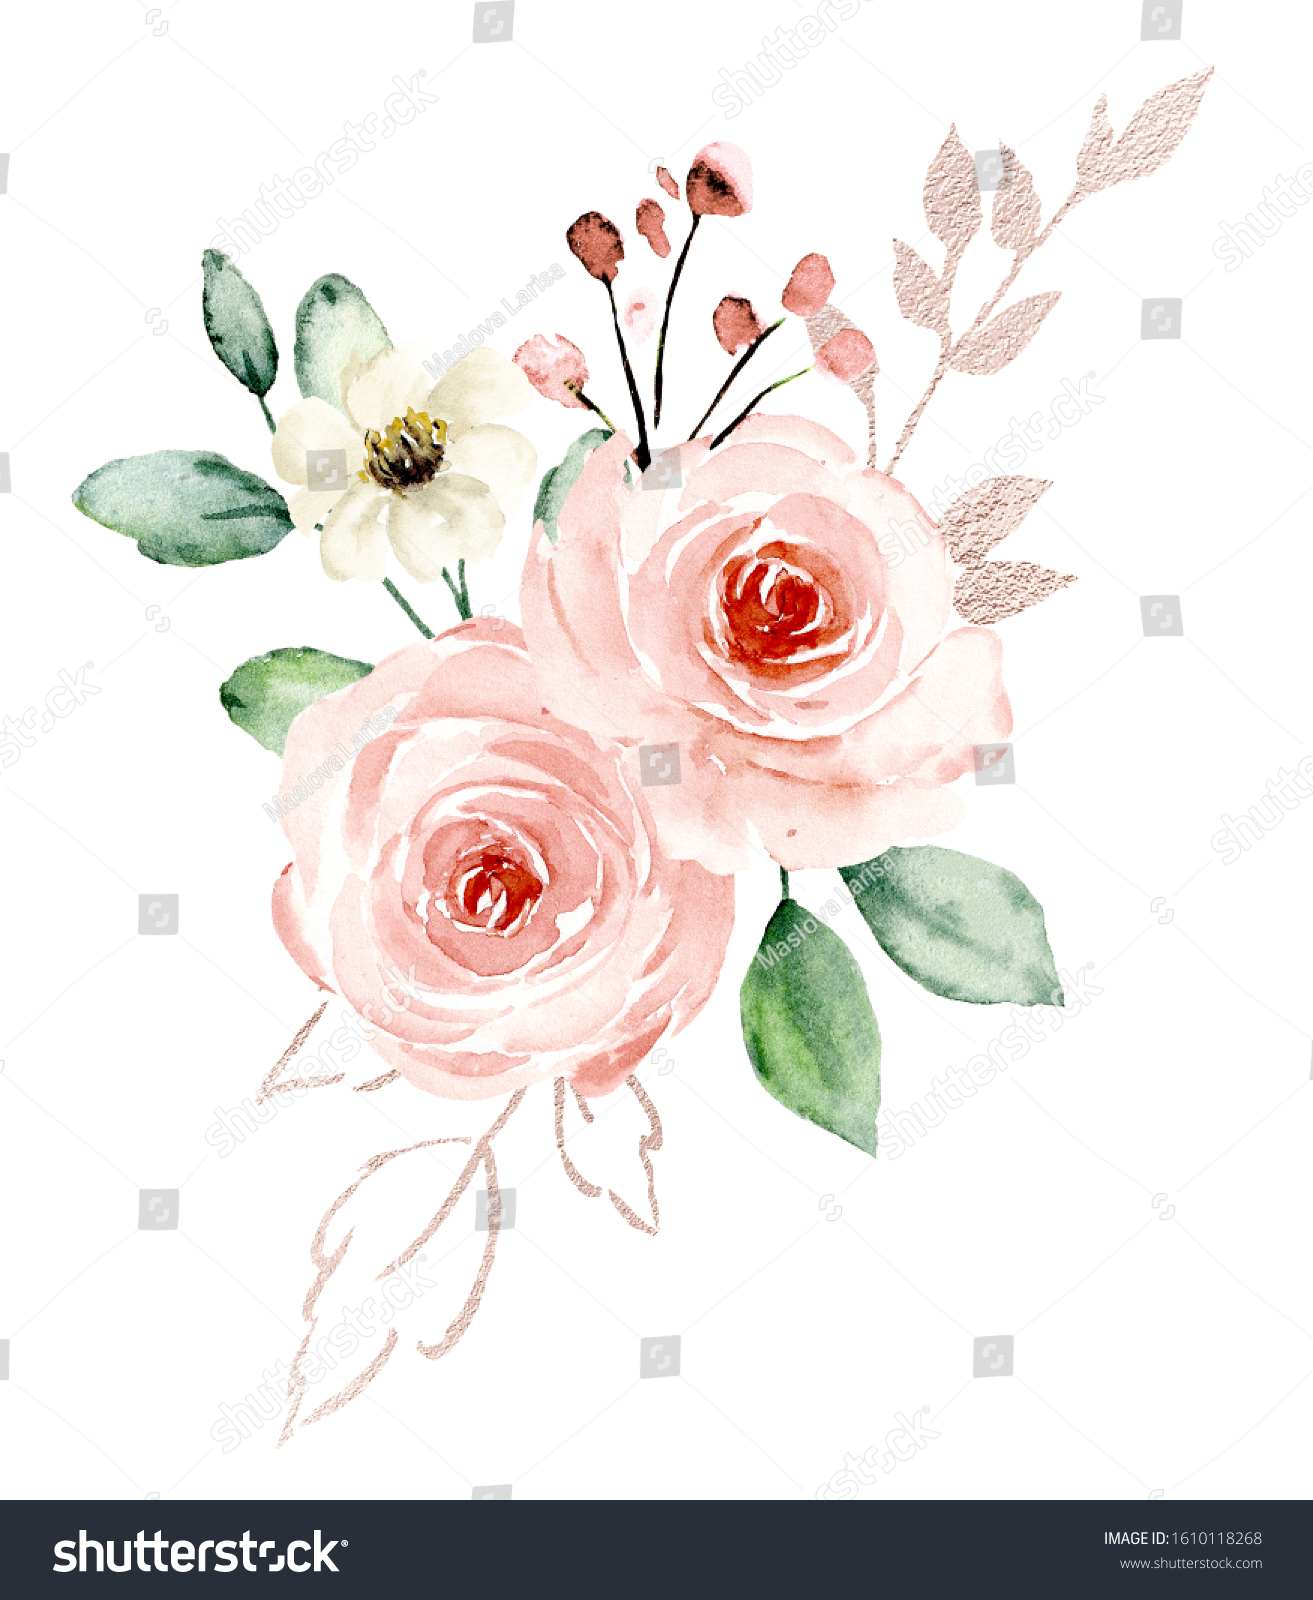 Flowers Pink Watercolor Floral Blossom Clip Stock Illustration 1610118268